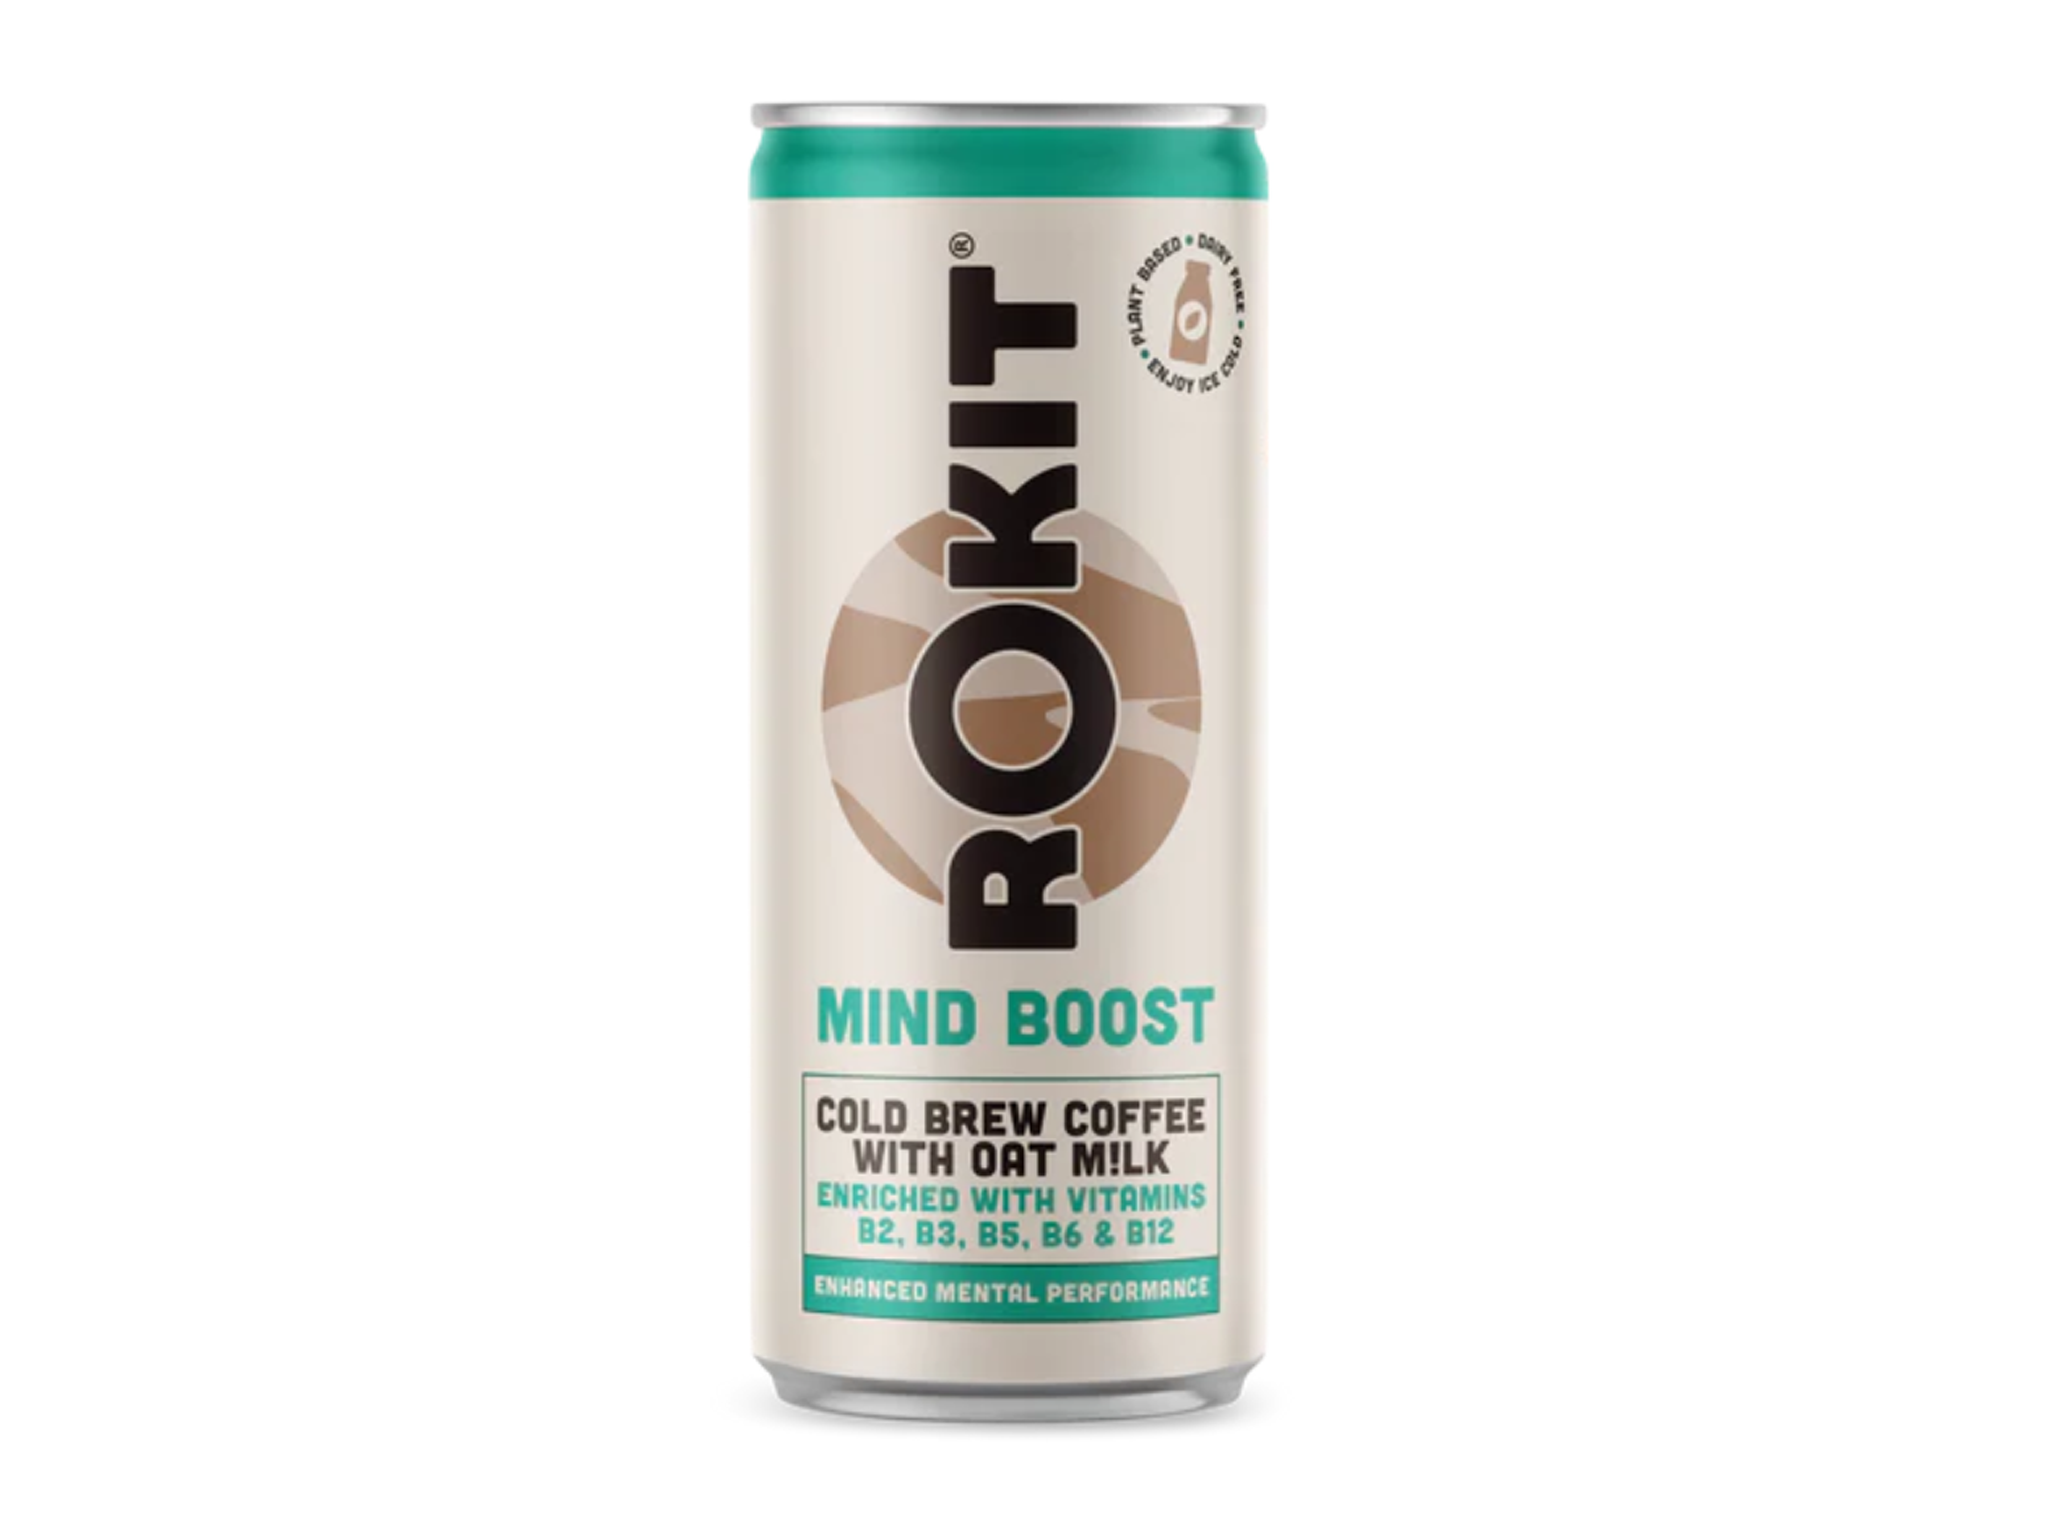 Rokit mind boost cold brew coffee review